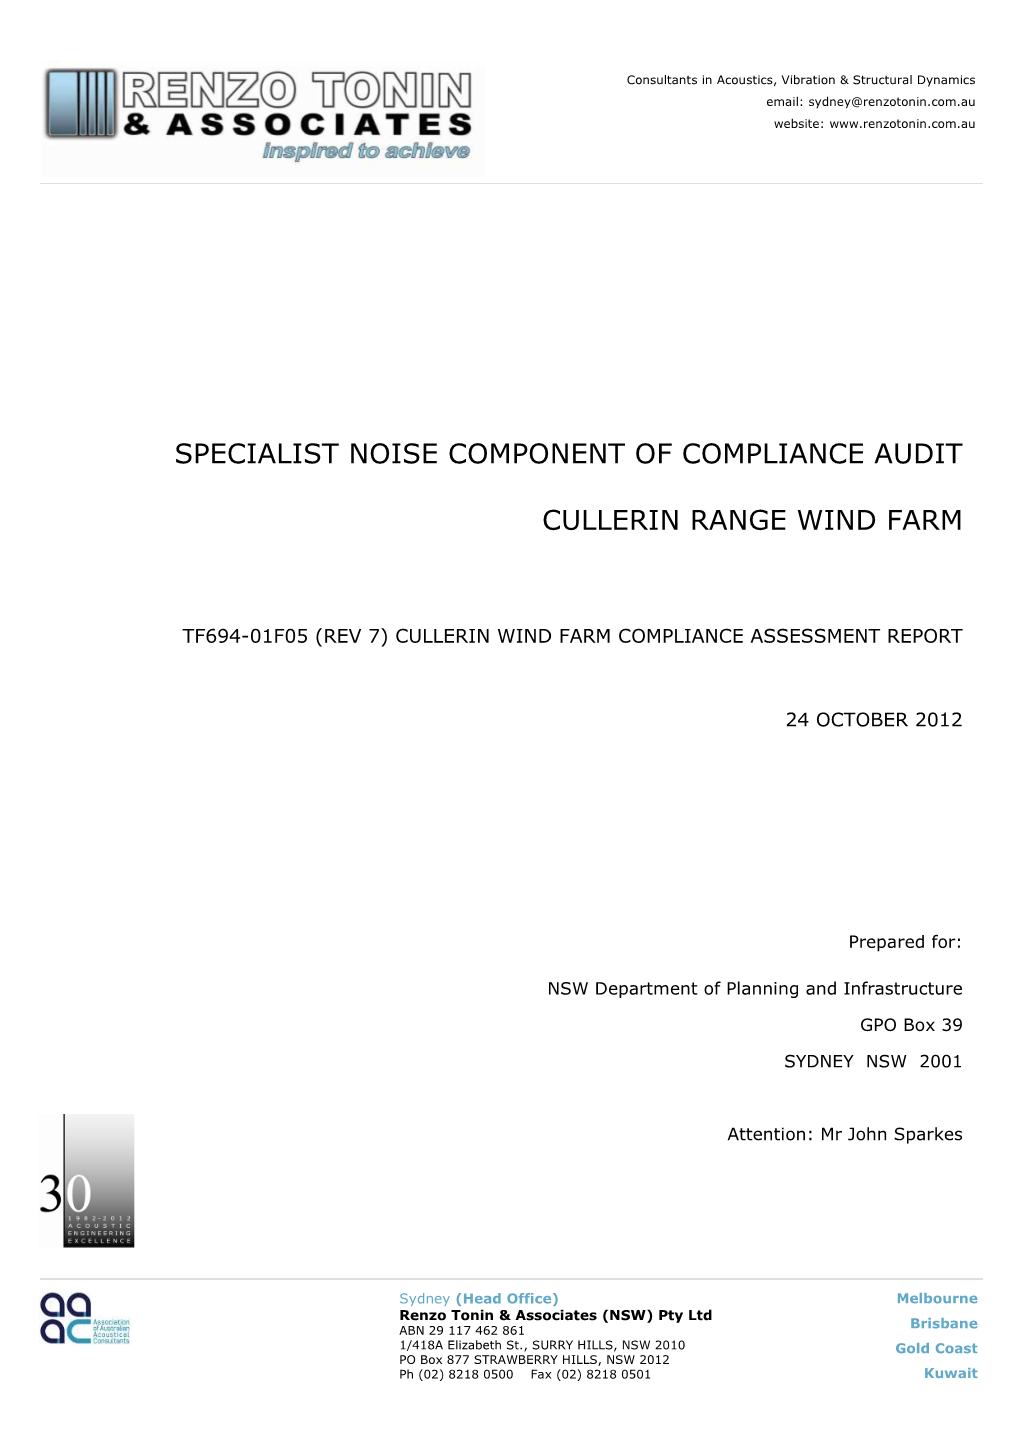 Specialist Noise Component of Compliance Audit Cullerin